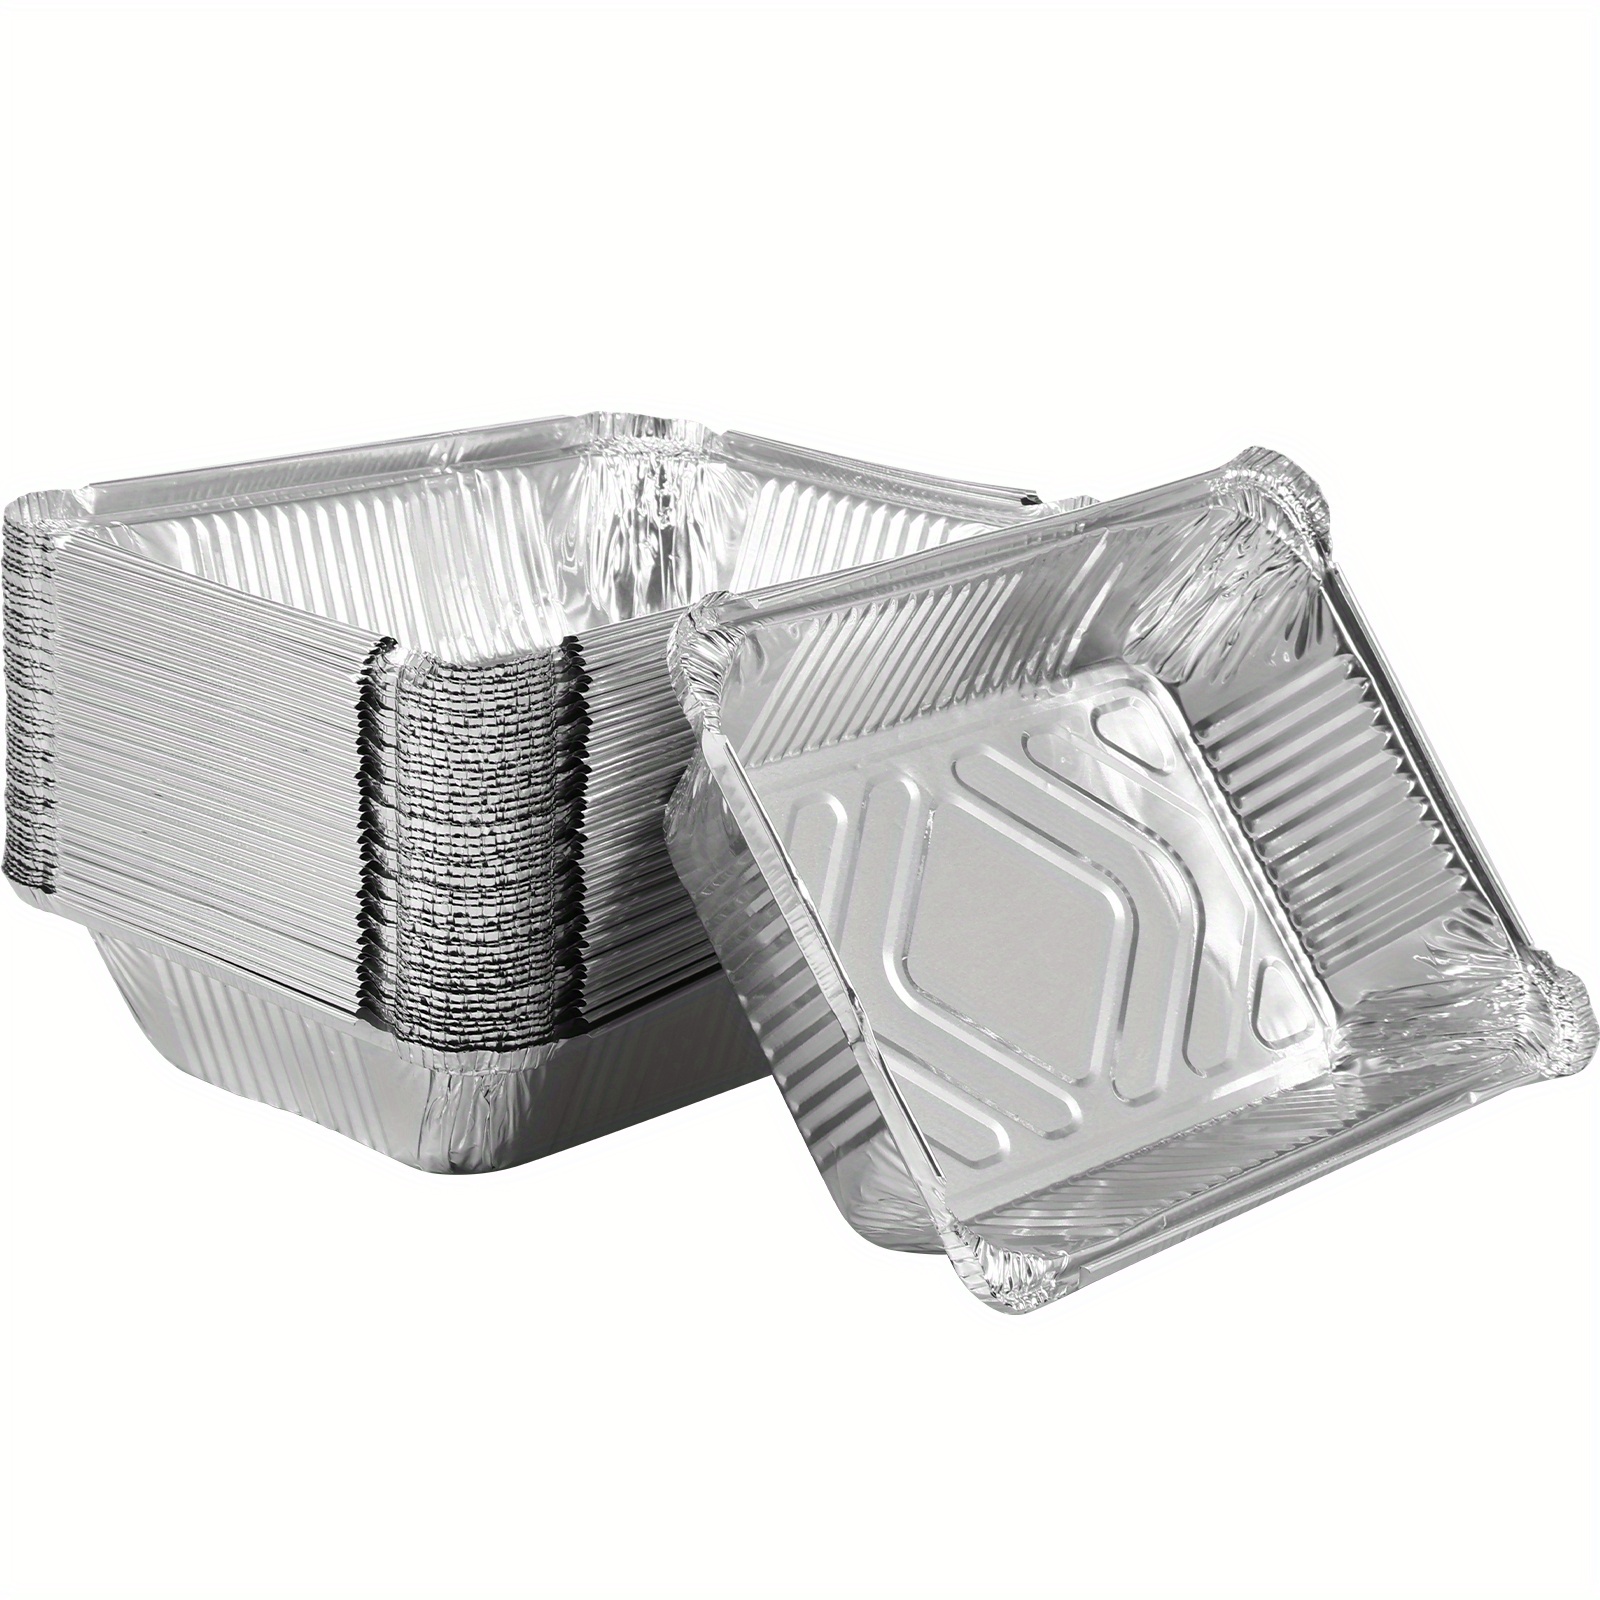 Food Grade Disposable Tin Foil Baking Pan/Trays/Container with